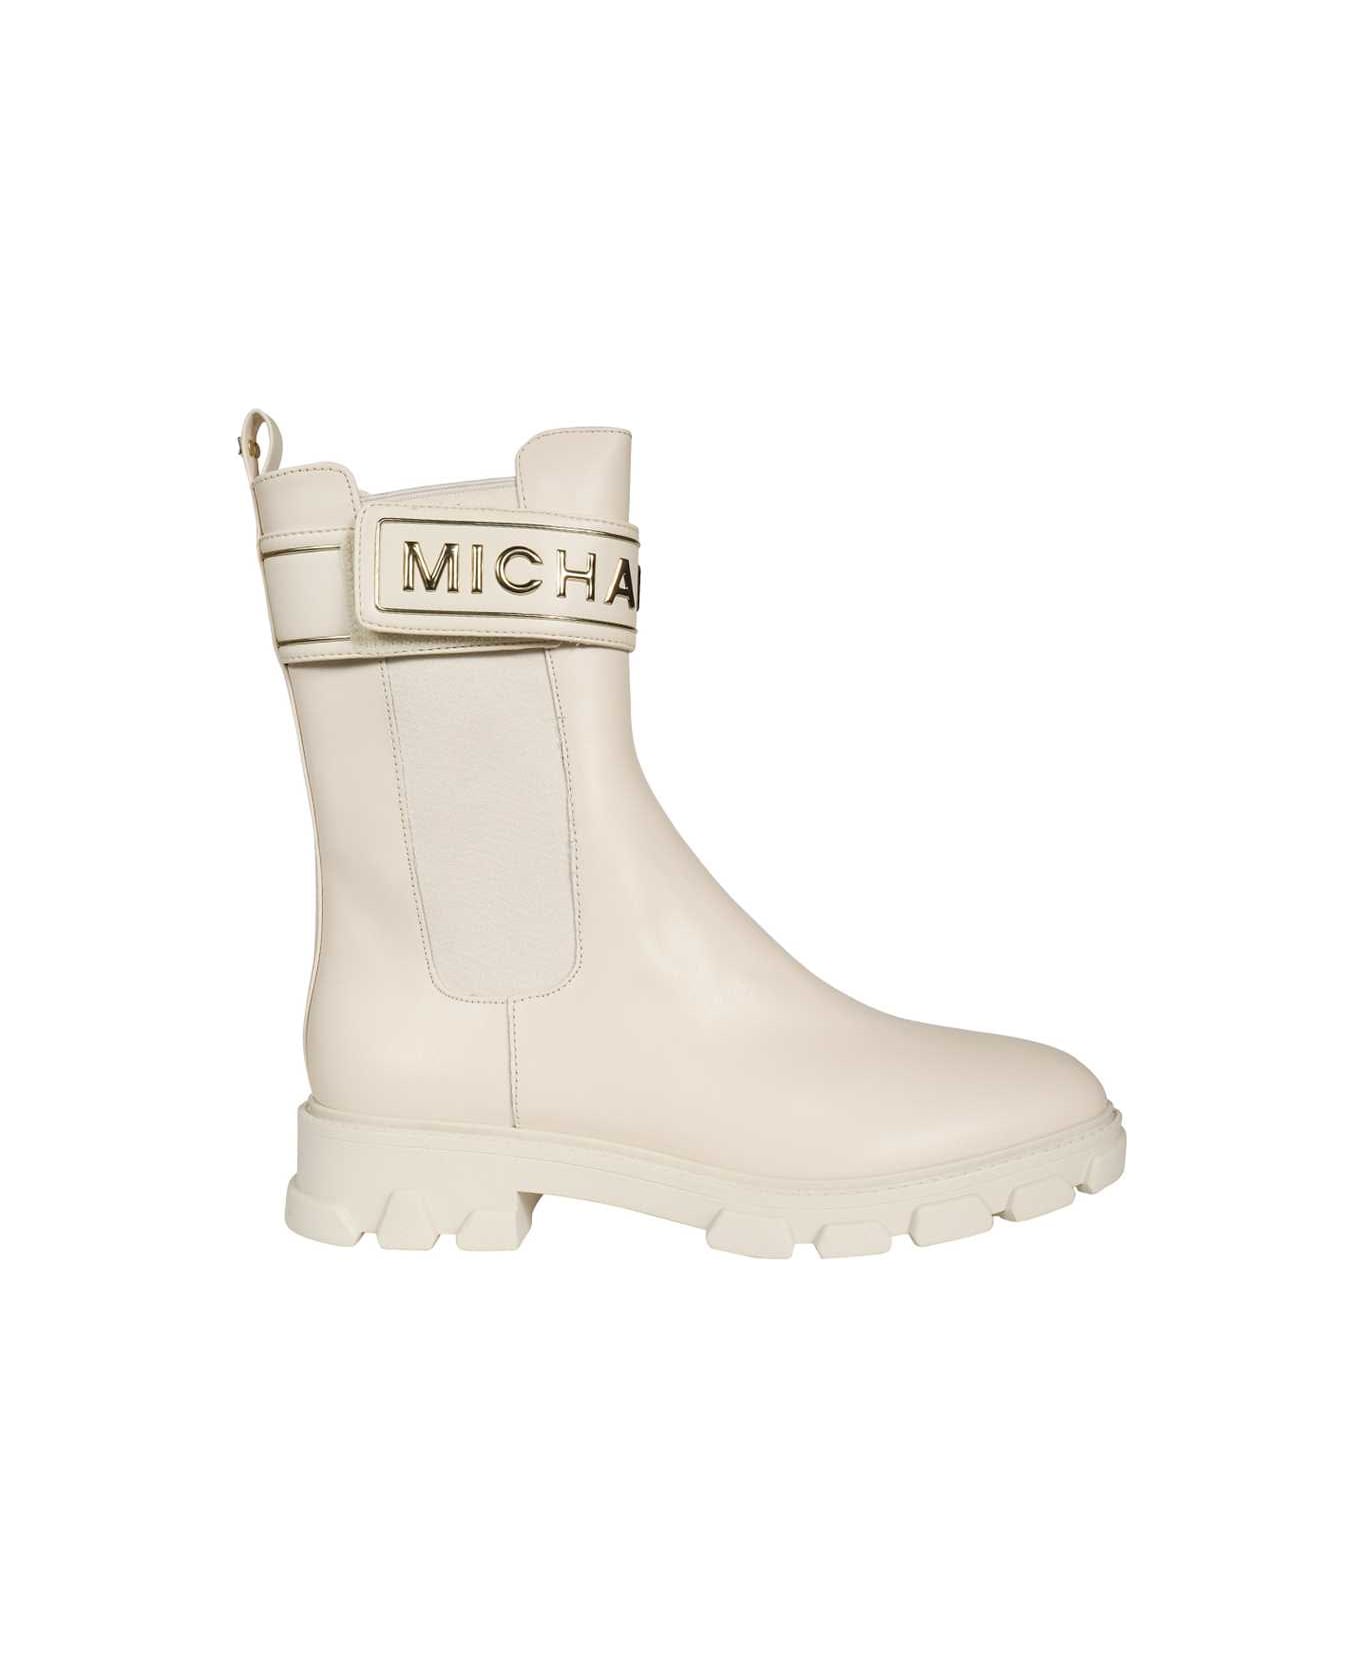 MICHAEL Michael Kors Leather Ankle Boots - White